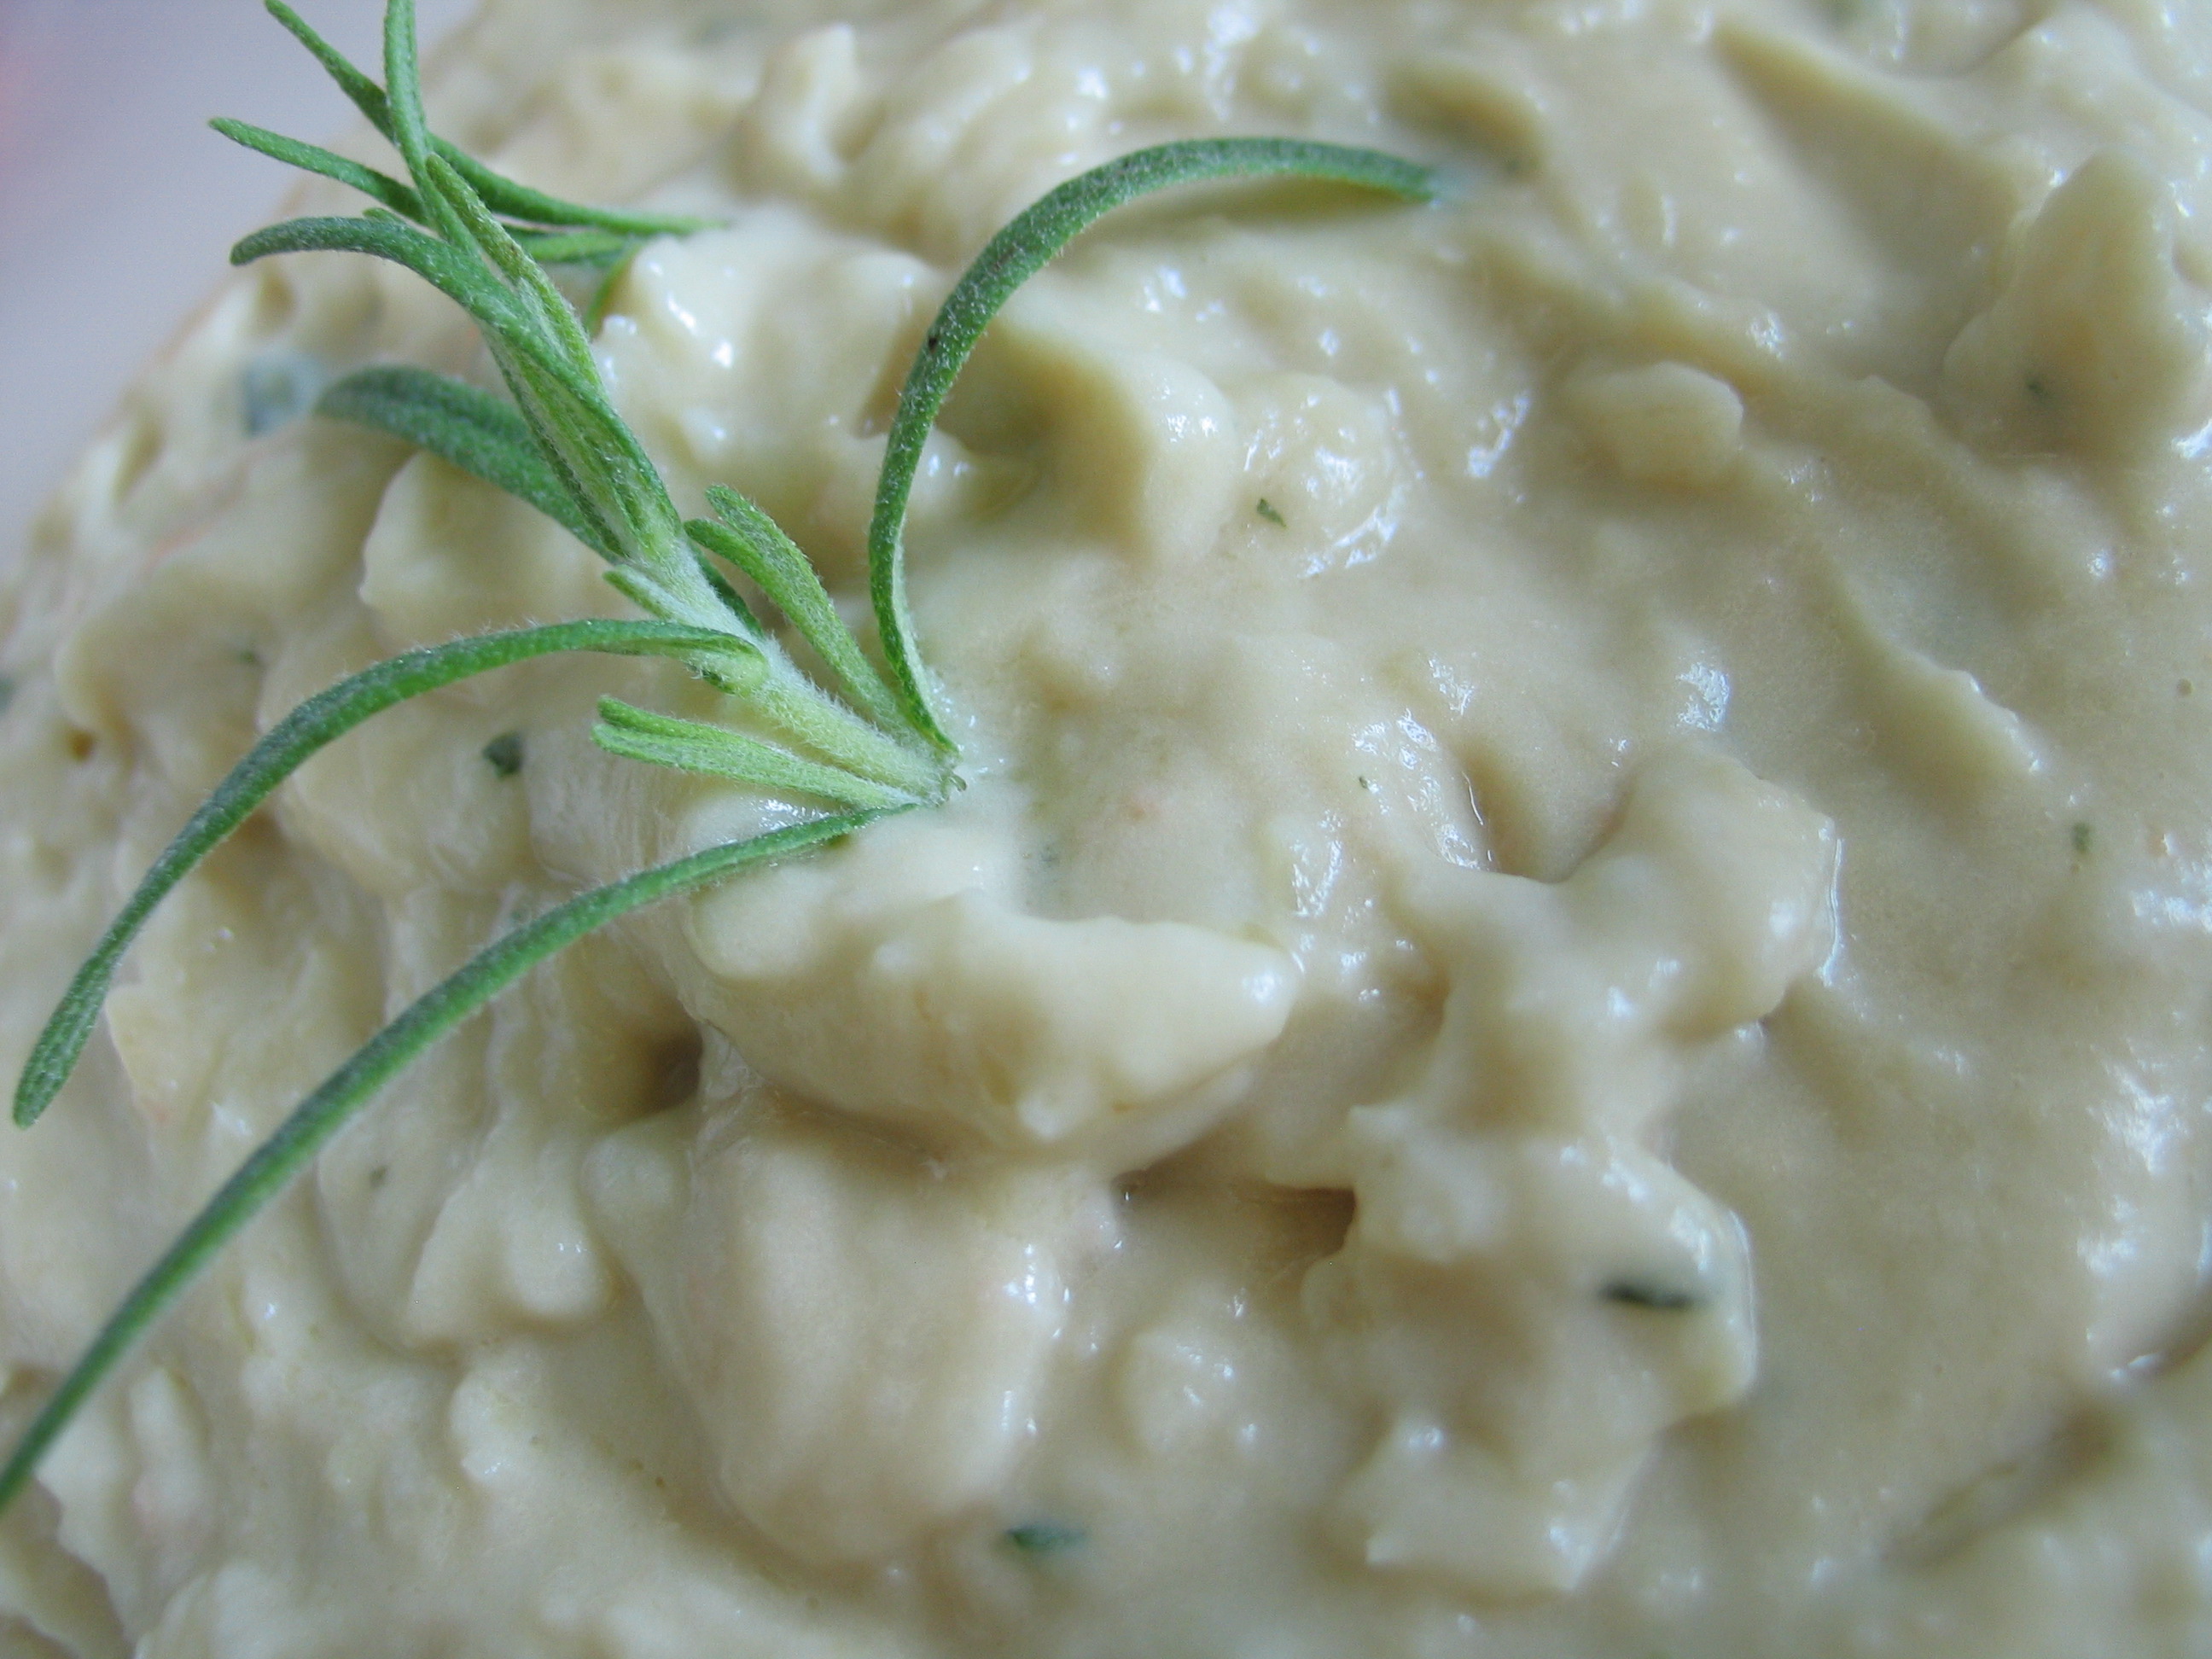 Roasted Garlic and White Bean Spread